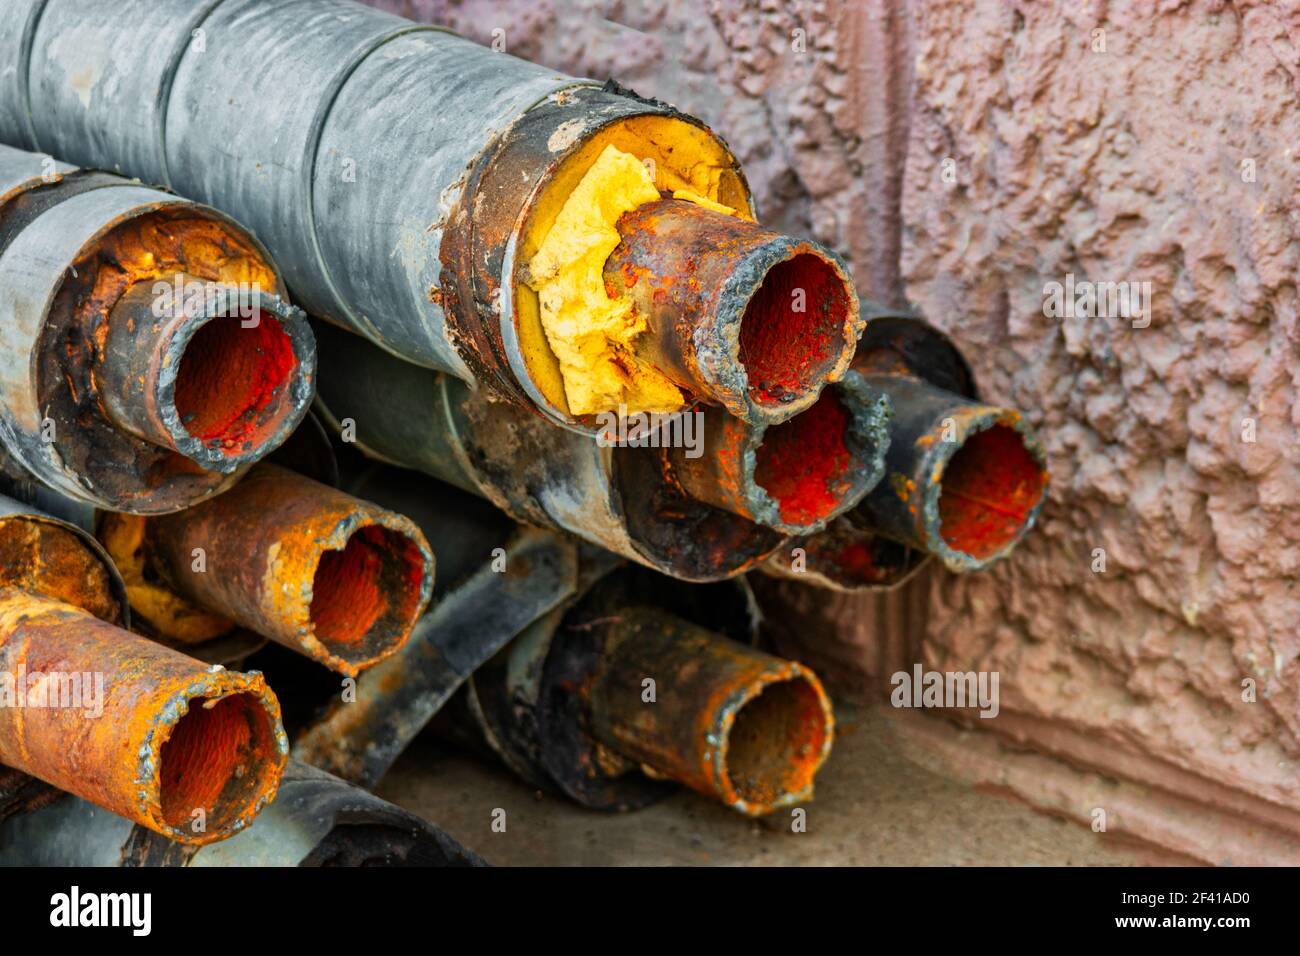 Water Pipeline repair. Rusty steel pipe with insulation on the construction site in a plastic foam tube wrapper lying on the yard in a bunch horizontally. Rusty old pipeline stacked up near the wall. Water Pipeline repair. Rusty steel pipe with insulation on the construction site in a plastic tube wrapper lying on the yard in a bunch horizontally. Rusty old pipeline stacked up Stock Photo